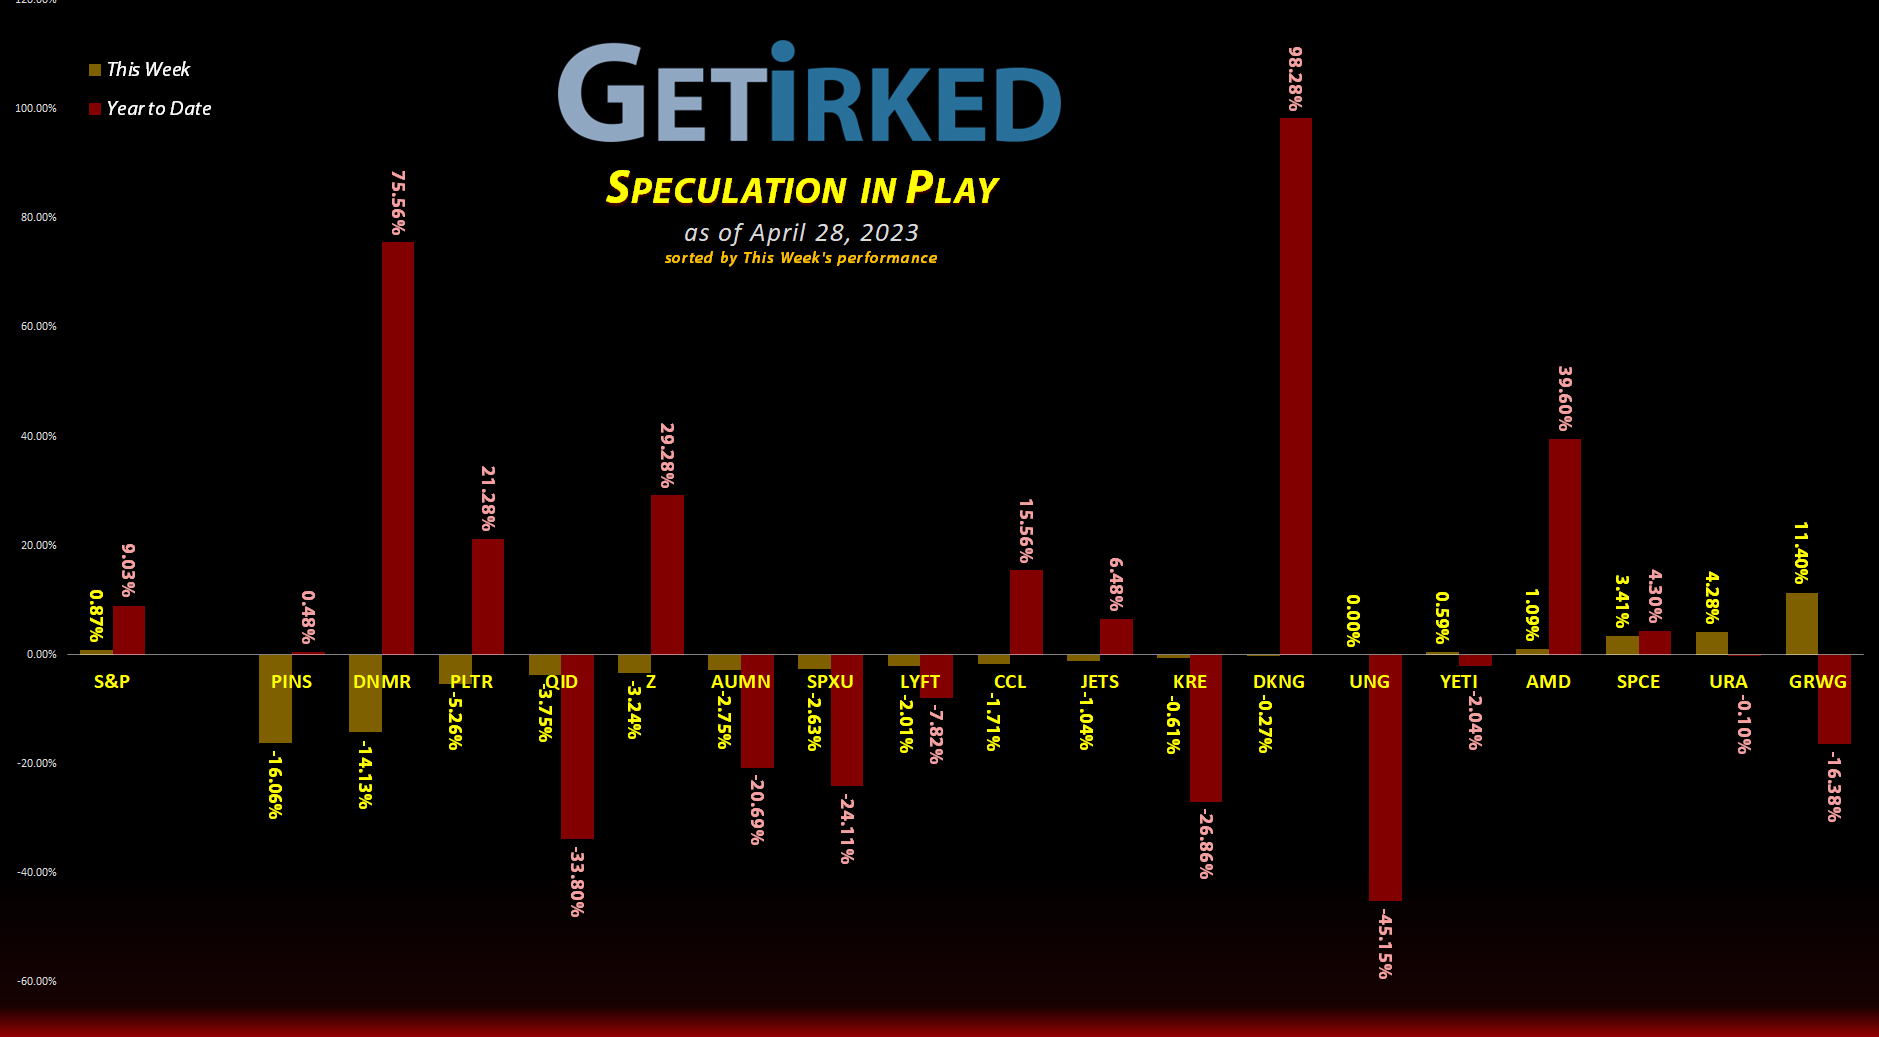 Get Irked's Speculation in Play - April 28, 2023